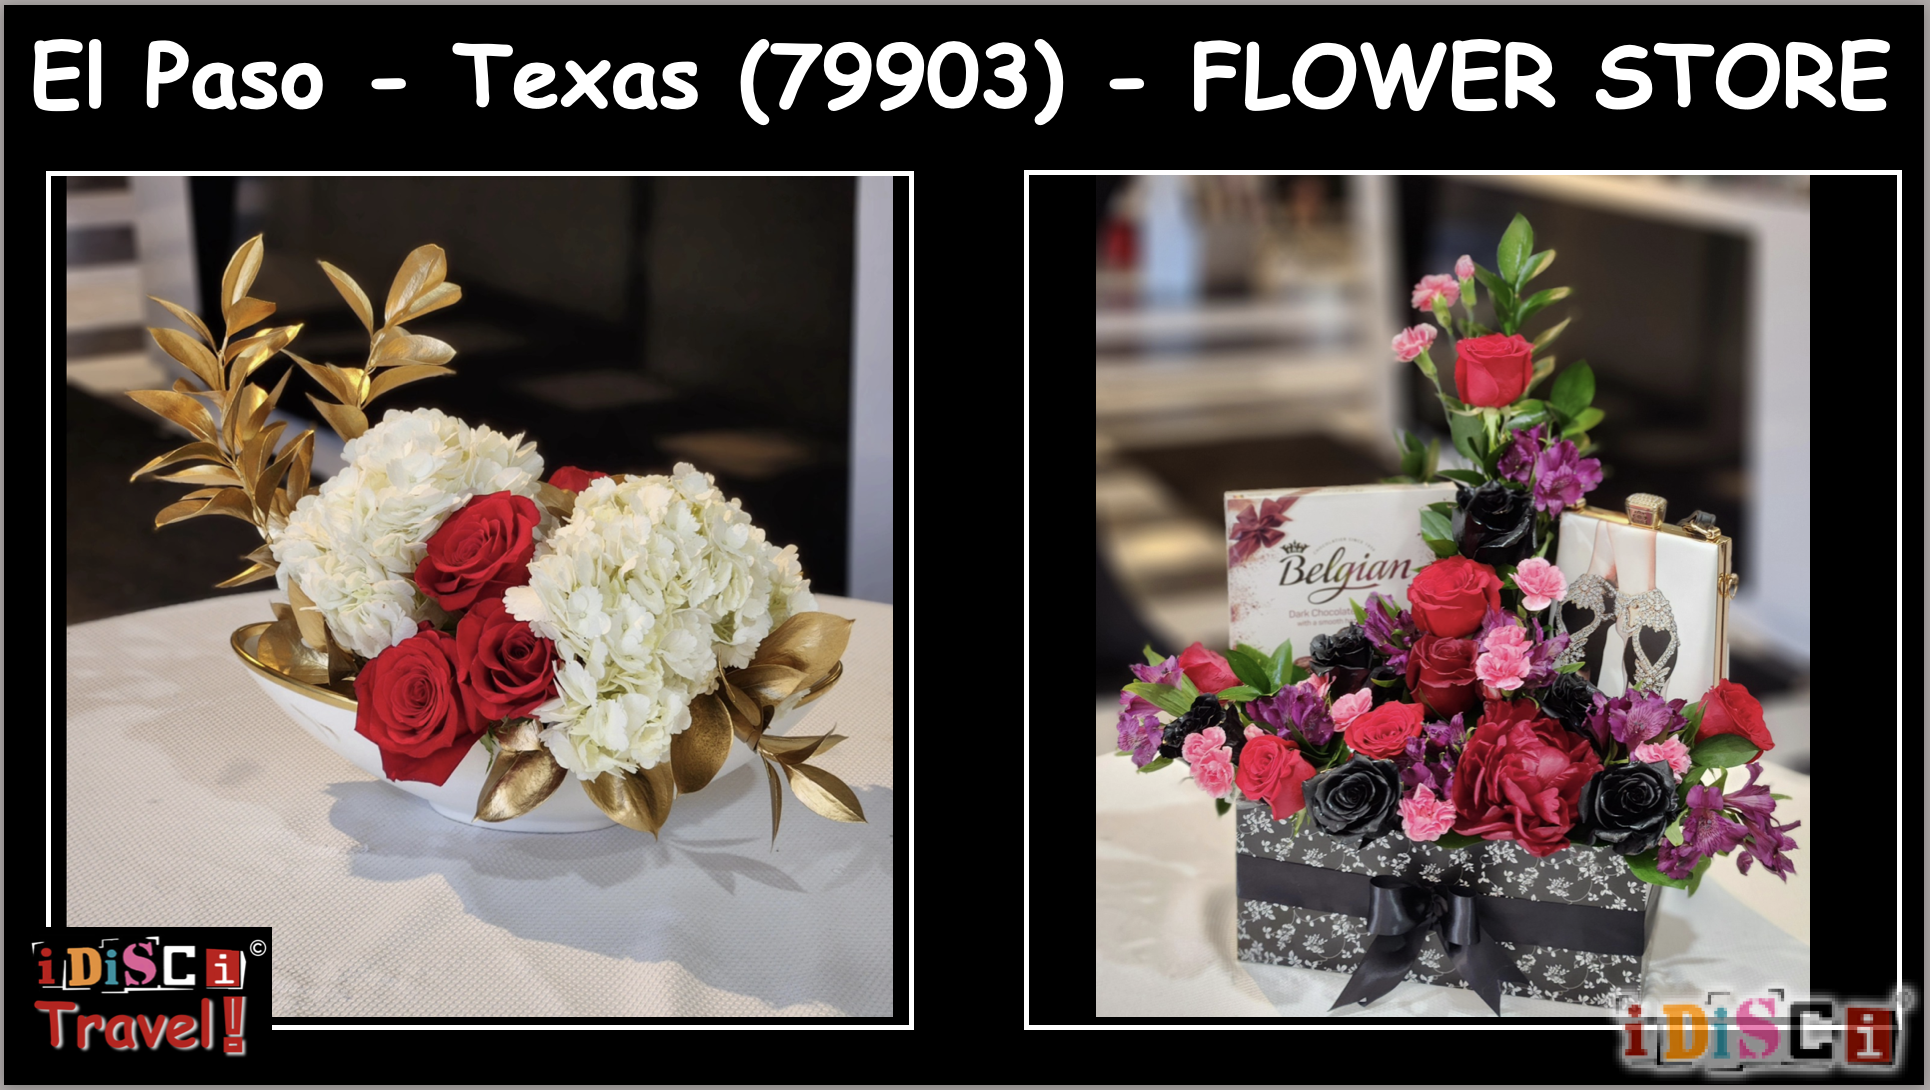 El Paso Texas, 79903, Five Points West, THE GIFT BOX, Cozy Café, Flower Shop, Cake Shop, Chocolate Shop, Wine Shop / Efficient Delivery Service / Everything Custom-Tailored for a special occasion!